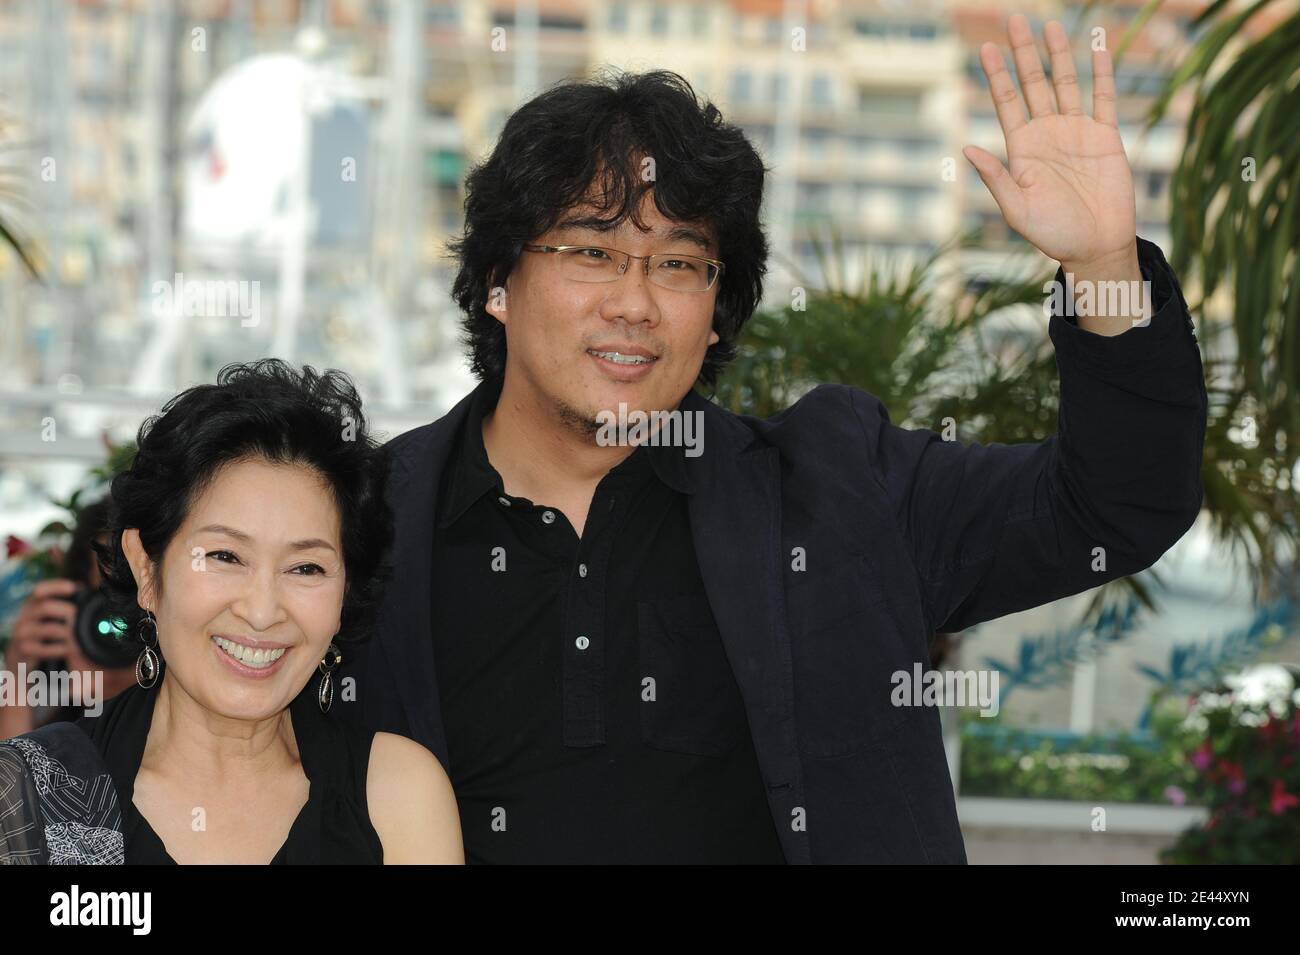 Actress Kim Hye-Ja and director Bong Joon Ho attend the 'Mother' Photocall held at the Palais Des Festival during the 62nd International Cannes Film Festival in Cannes, France on May 16, 2009. Photo by Nebinger-Orban/ABACAPRESS.COM Stock Photo